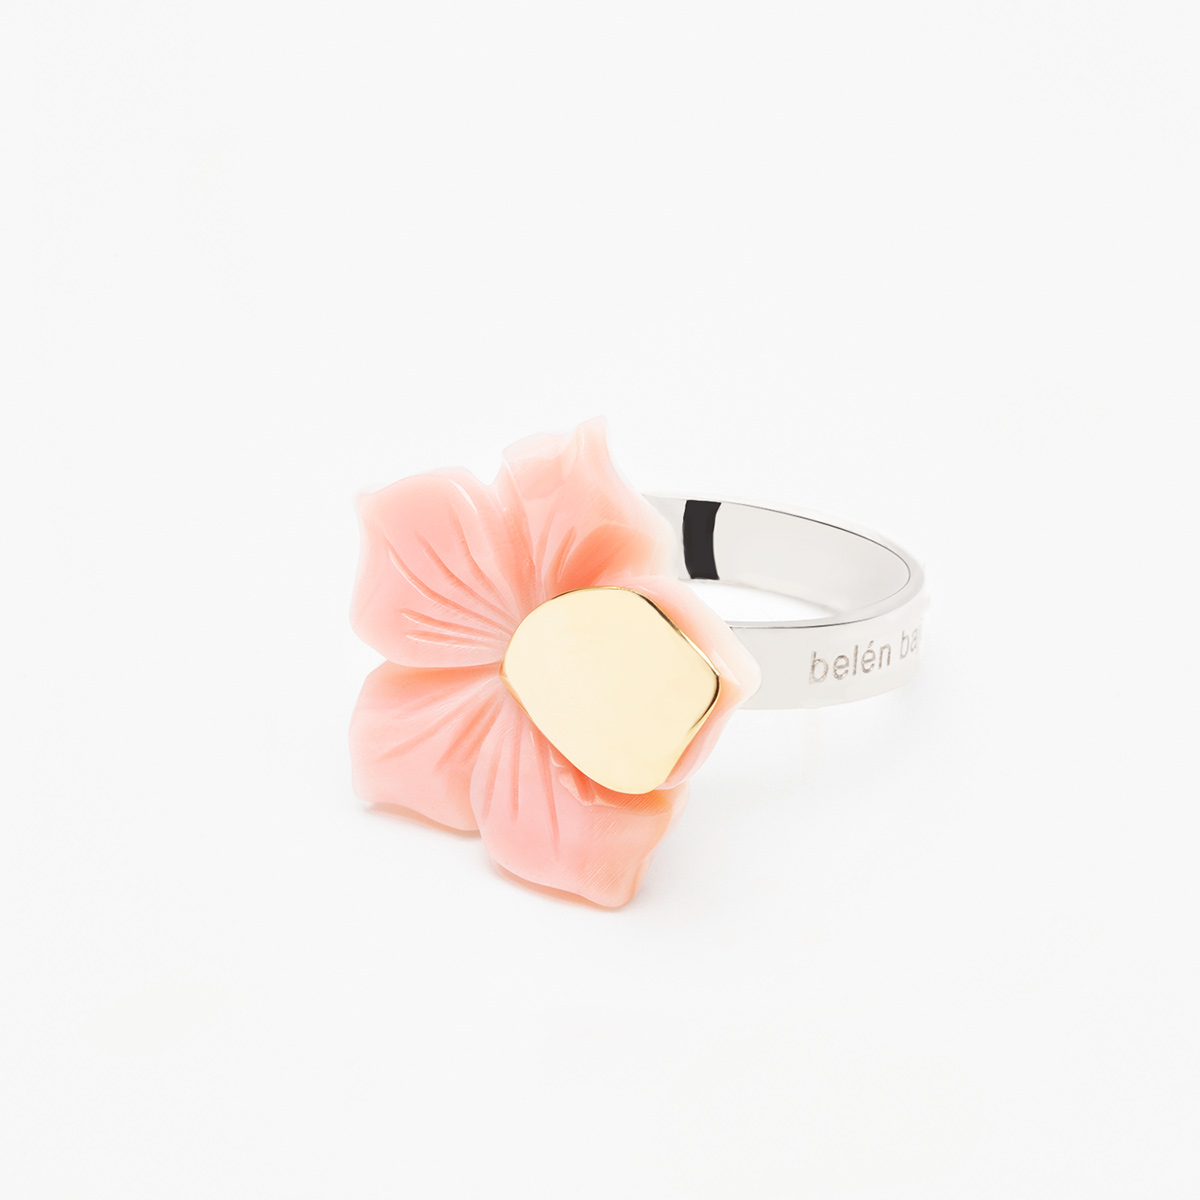 Aine handmade ring in 9k or 18k gold, sterling silver and pink shell 1 designed by Belen Bajo